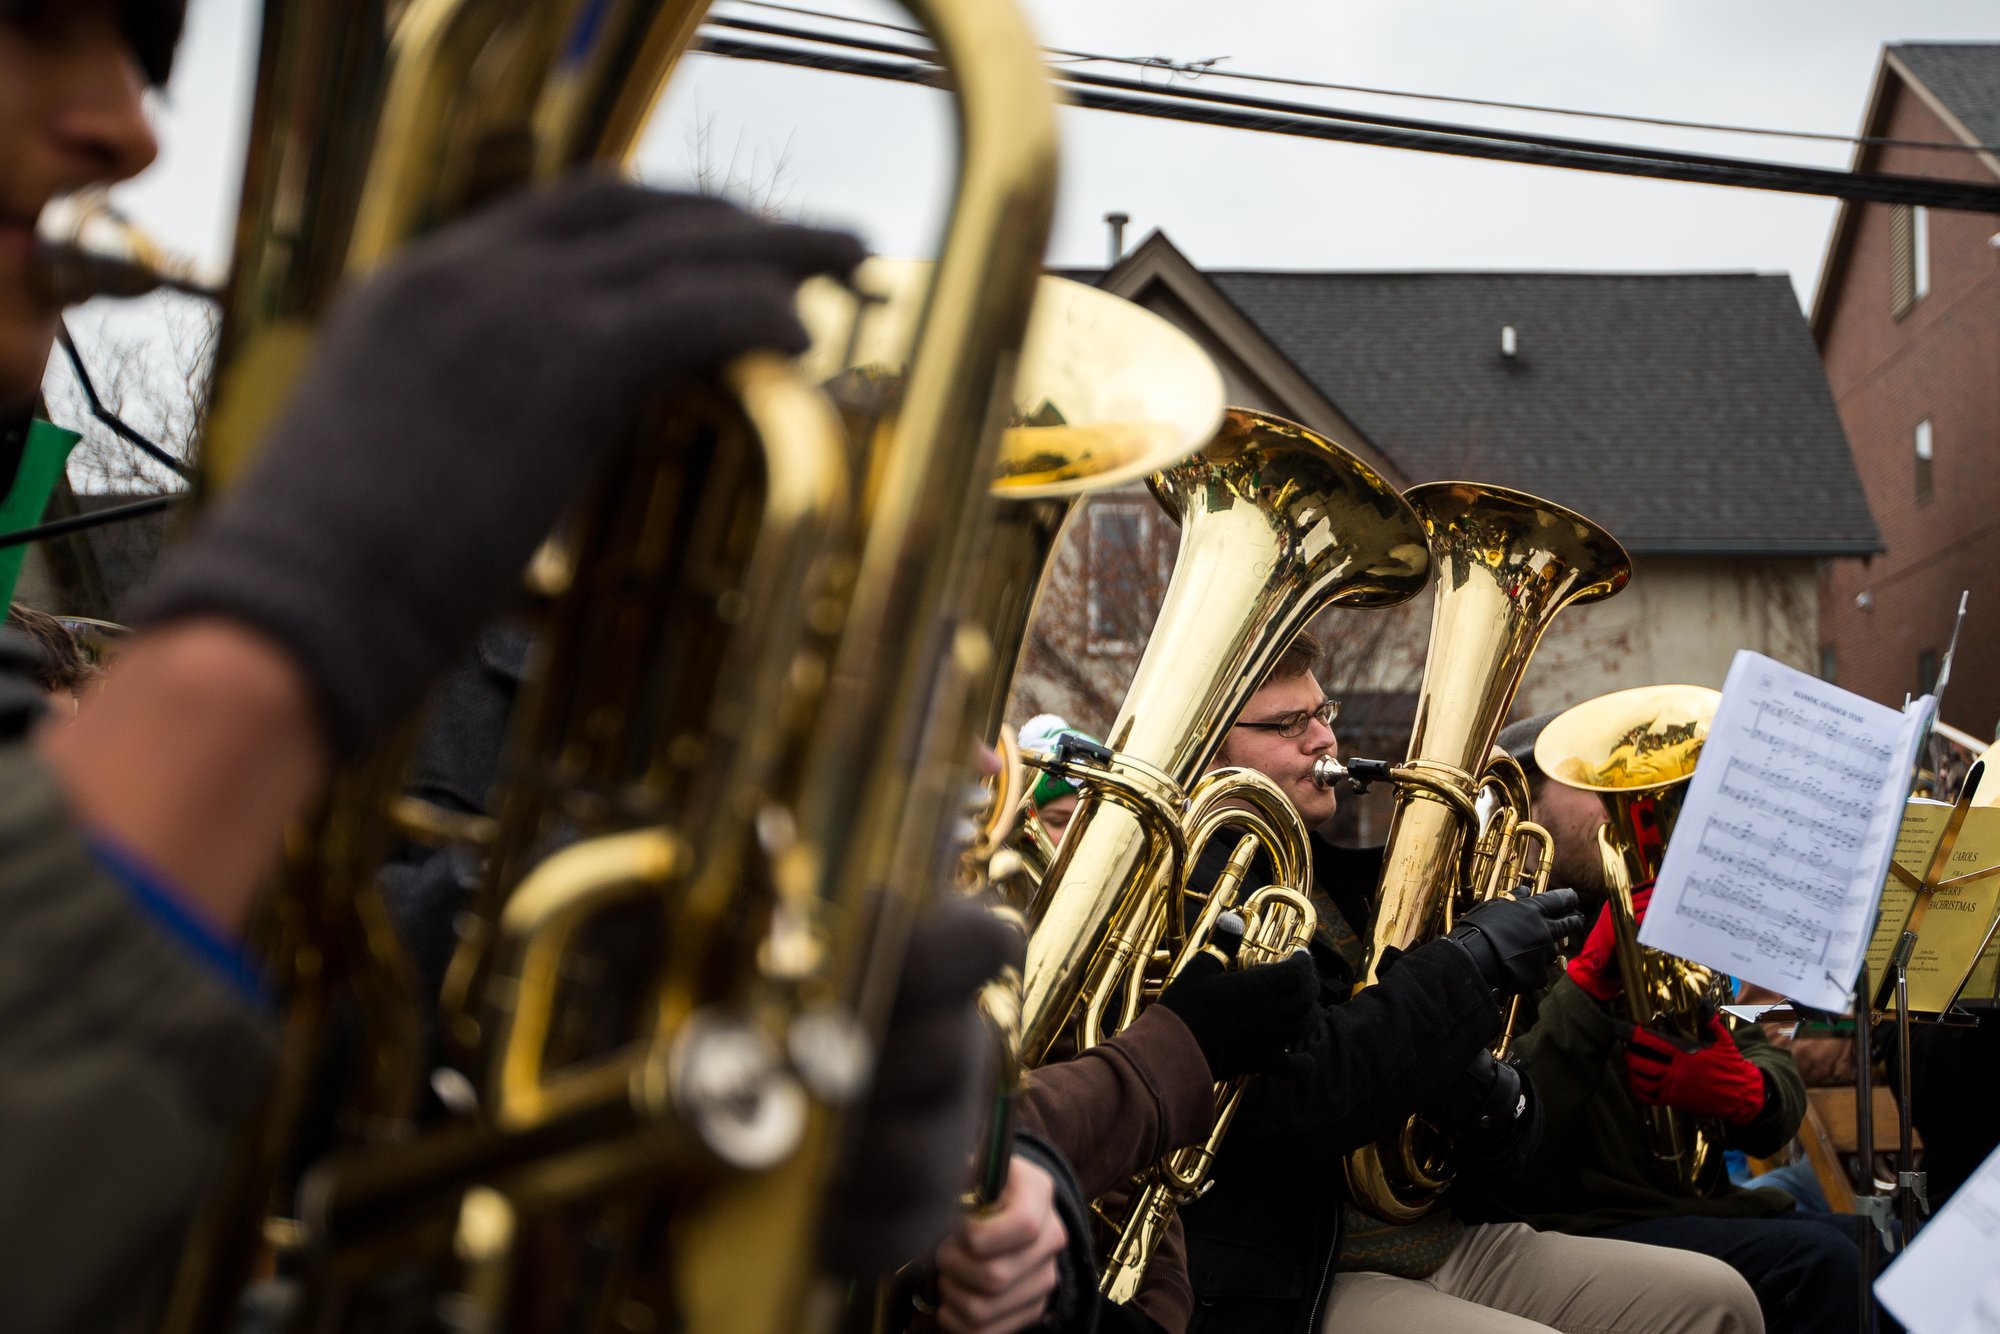  People play Christmas music during the annual Tuba Christmas event at the Ann Arbor Farmers Market in Kerrytown on Sunday, December 4, 2016. A record 62 people made up this years Tuba Christmas band, ranging from high school students, to retirees. M